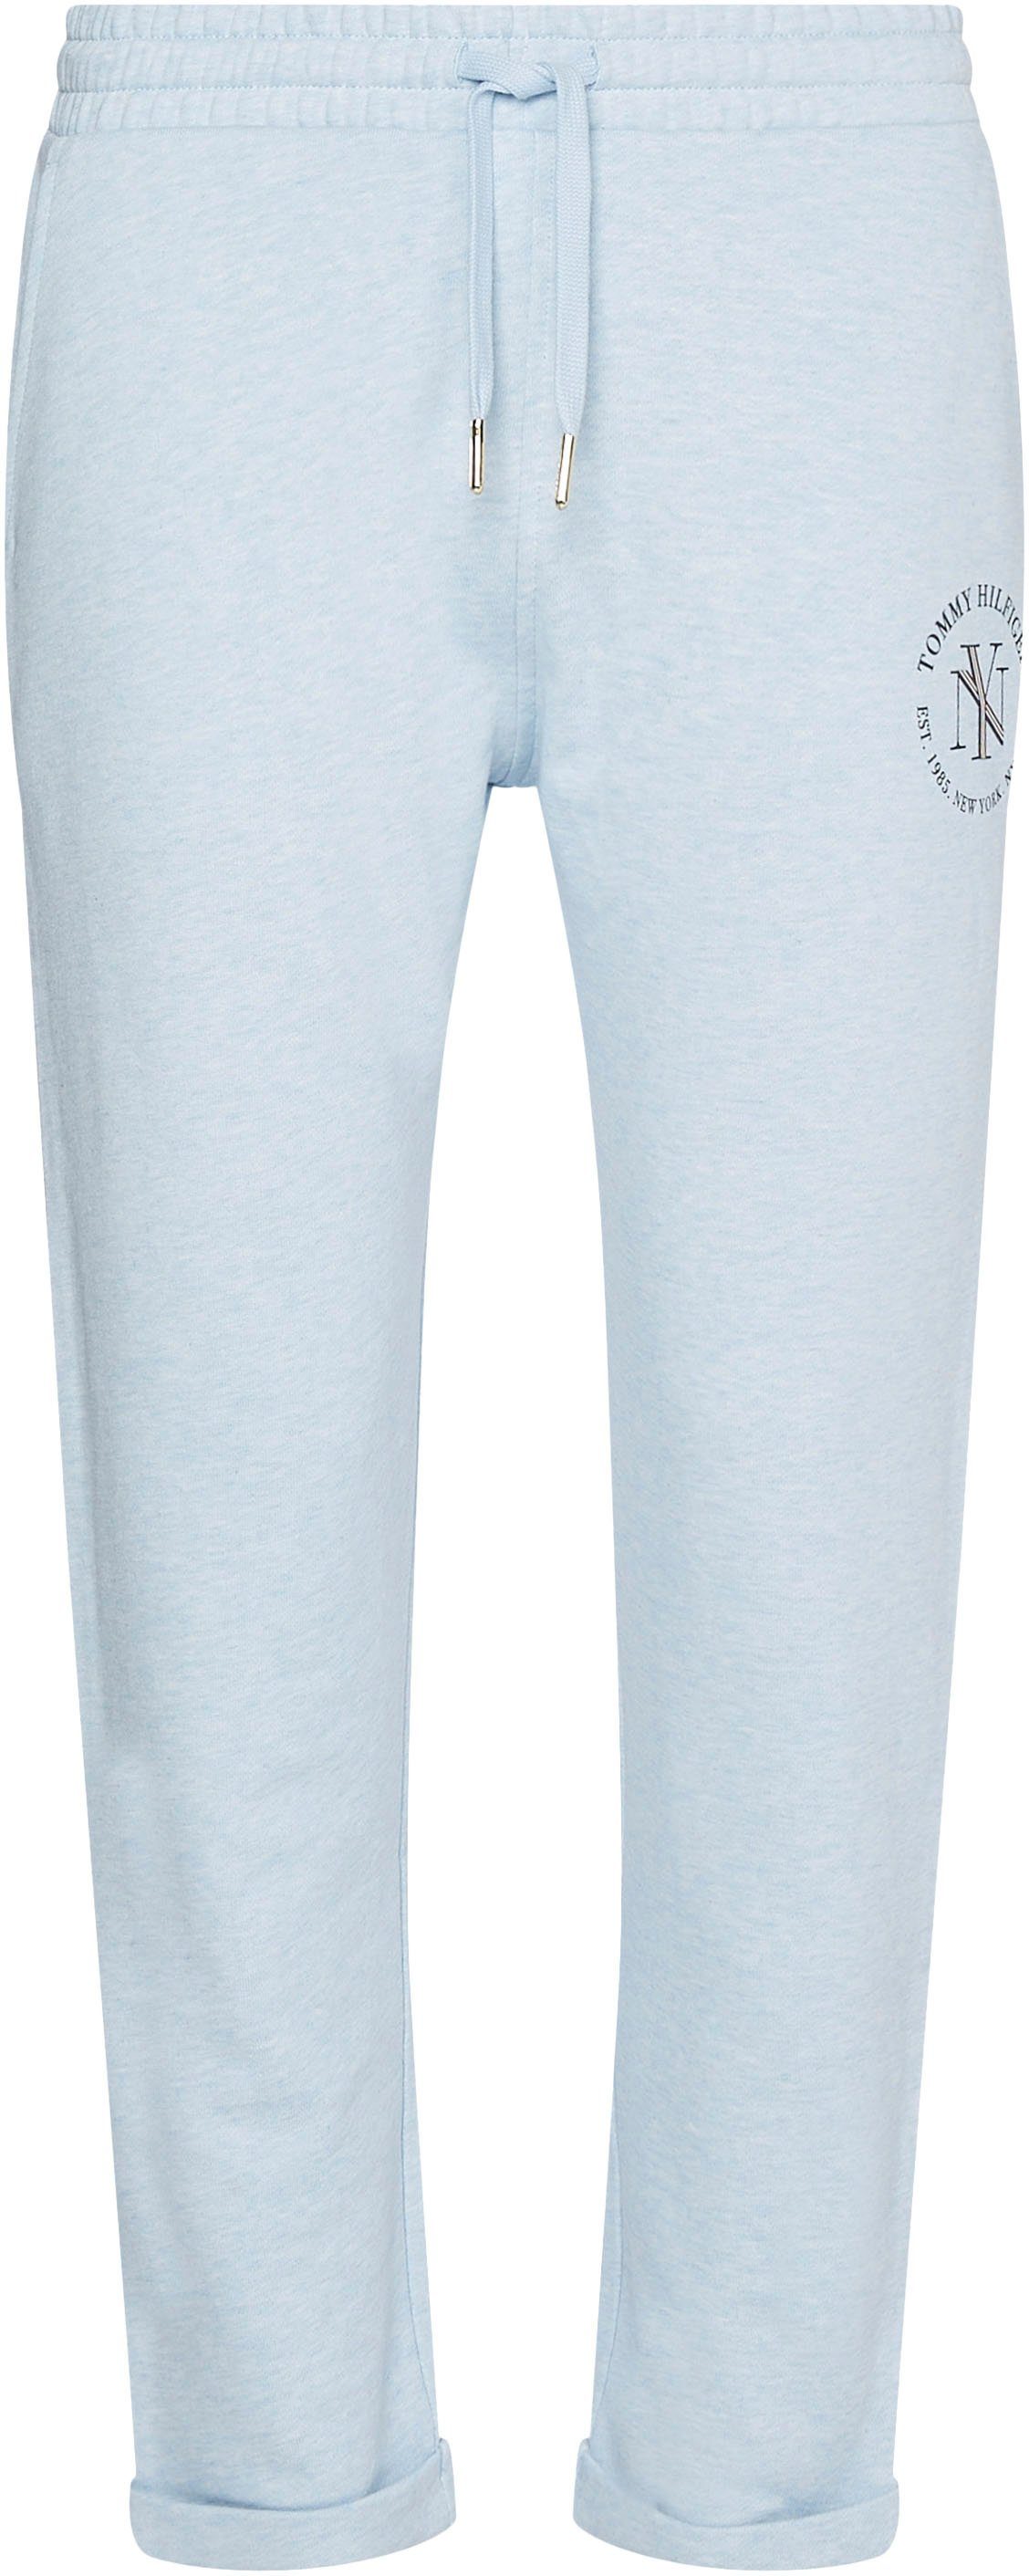 Markenlabel NYC Breezy-Blue-Heather Tommy SWEATPANTS Sweatpants TAPERED mit Hilfiger Tommy ROUNDALL Hilfiger